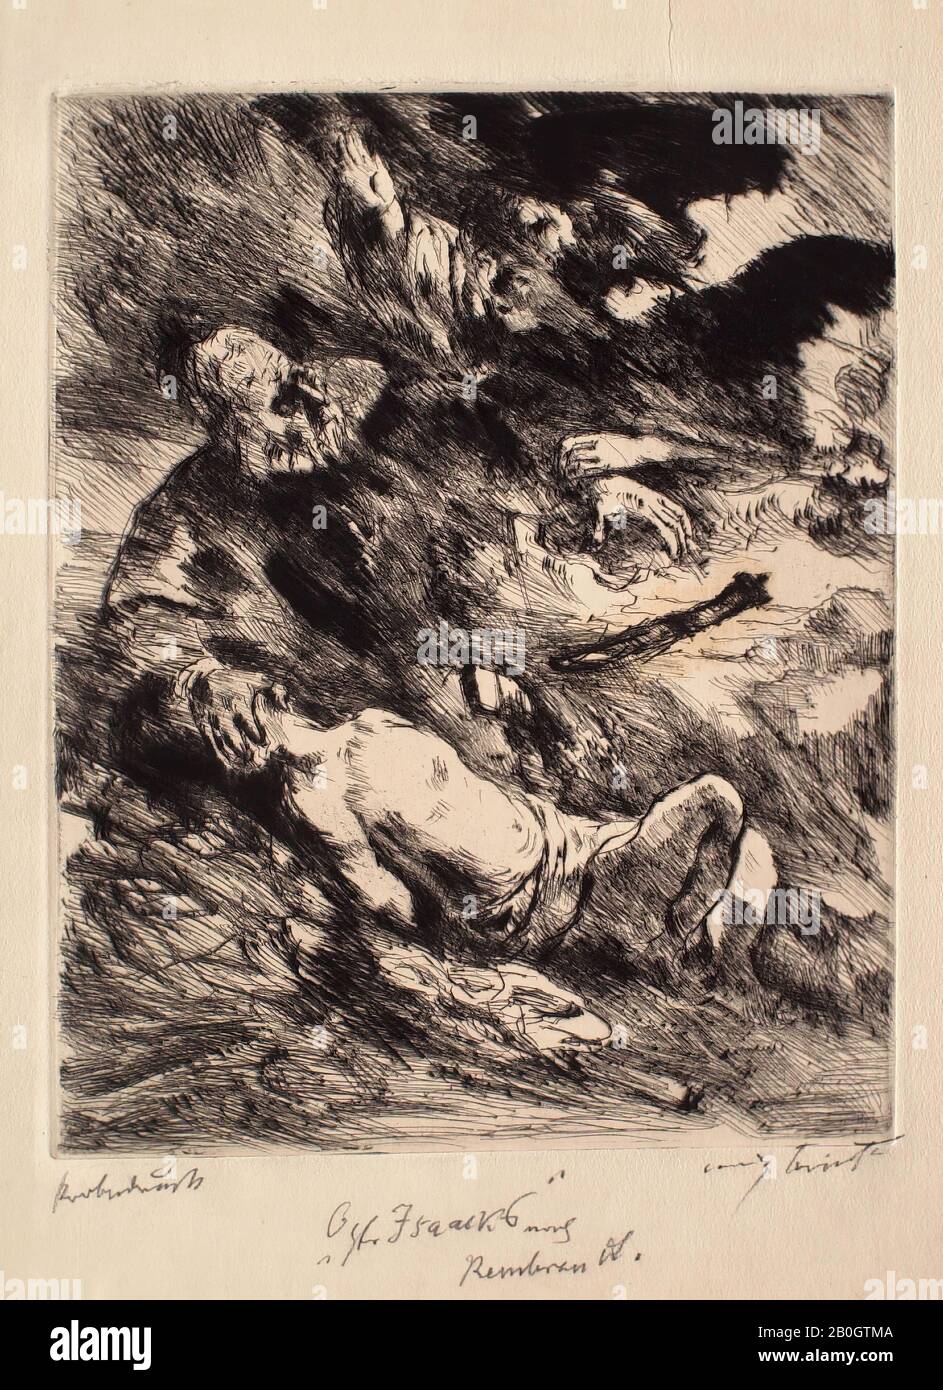 Lovis Corinth, German, 1858-1925, After Rembrandt van Rijn, (Dutch, 1606-1669), The Sacrifice of Isaac, c. 1920, Drypoint and etching on paper on vélin paper, image: 12 3/16 x 9 3/4 in. (31 x 24.8 cm Stock Photo